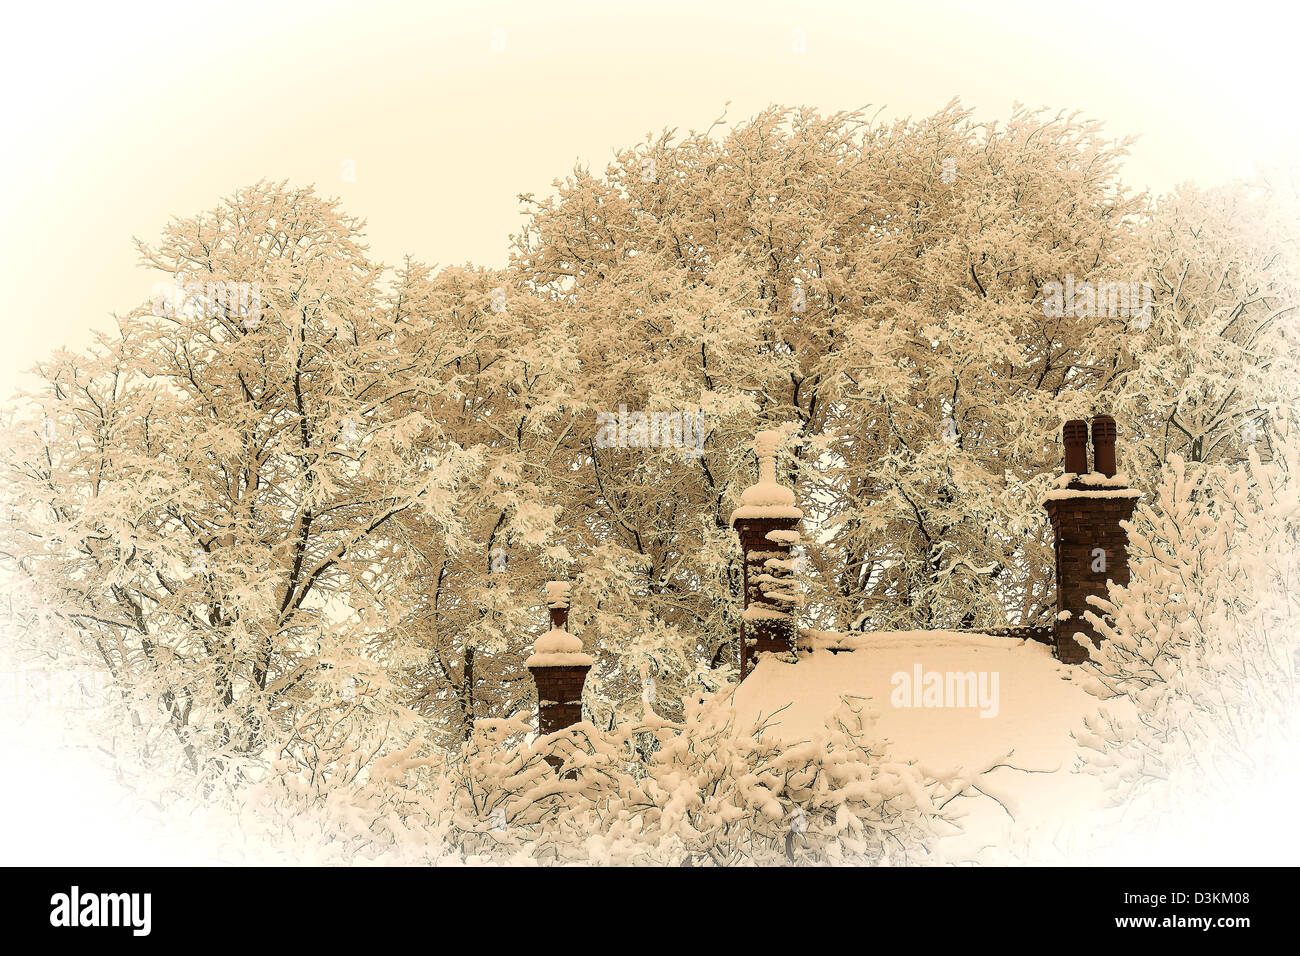 Winter scene. Dickensian image of snow covered roof, chimneys and trees in the background. Stock Photo